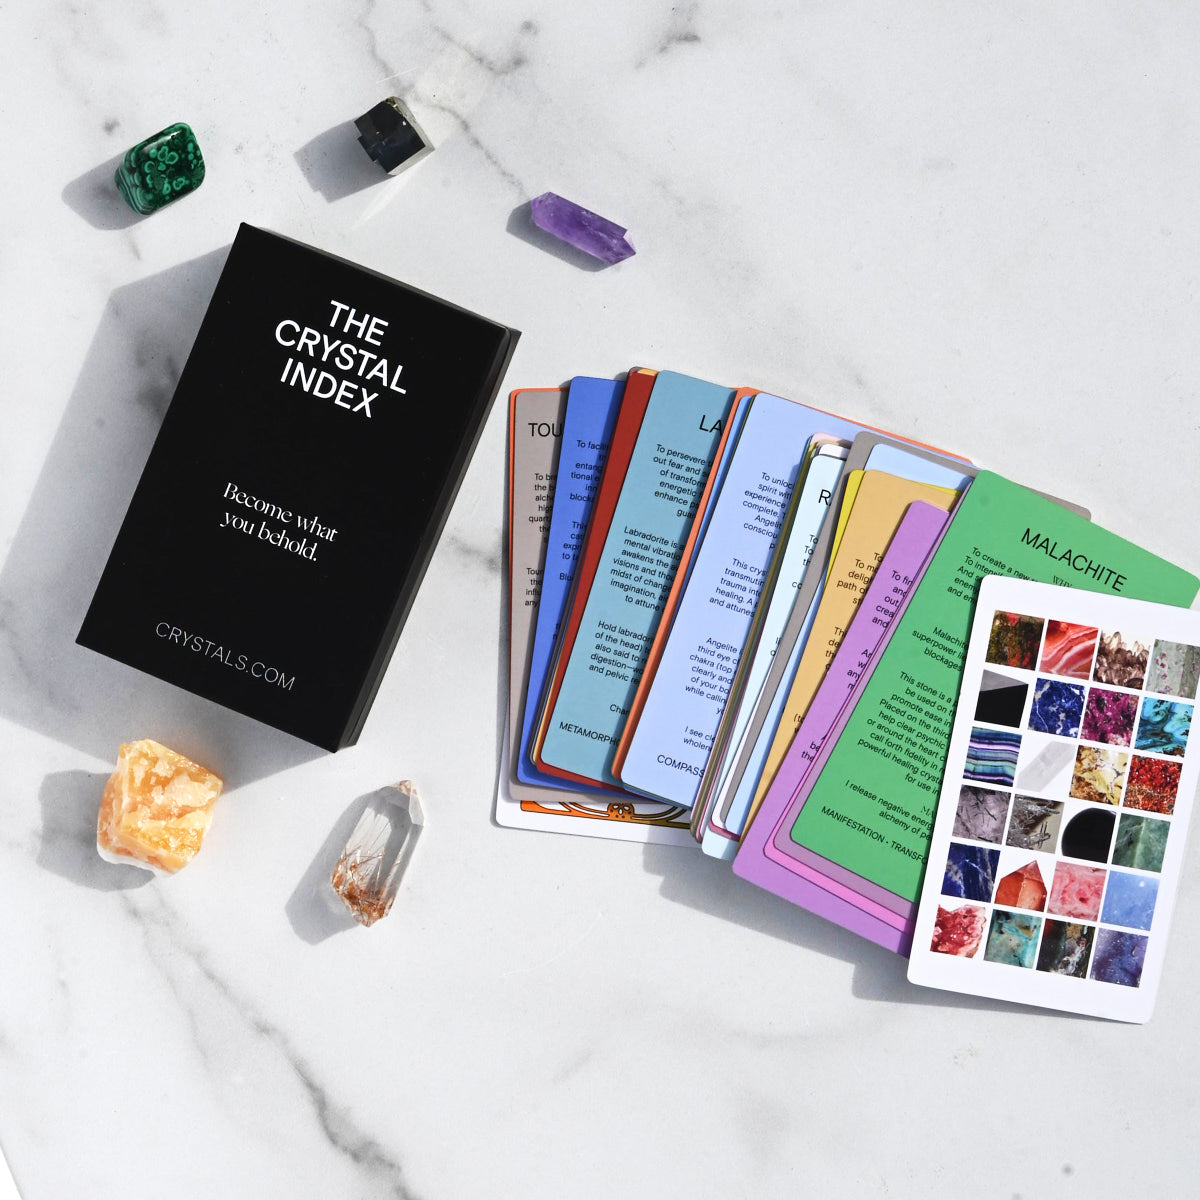 THE CRYSTAL INDEX - CARD DECK